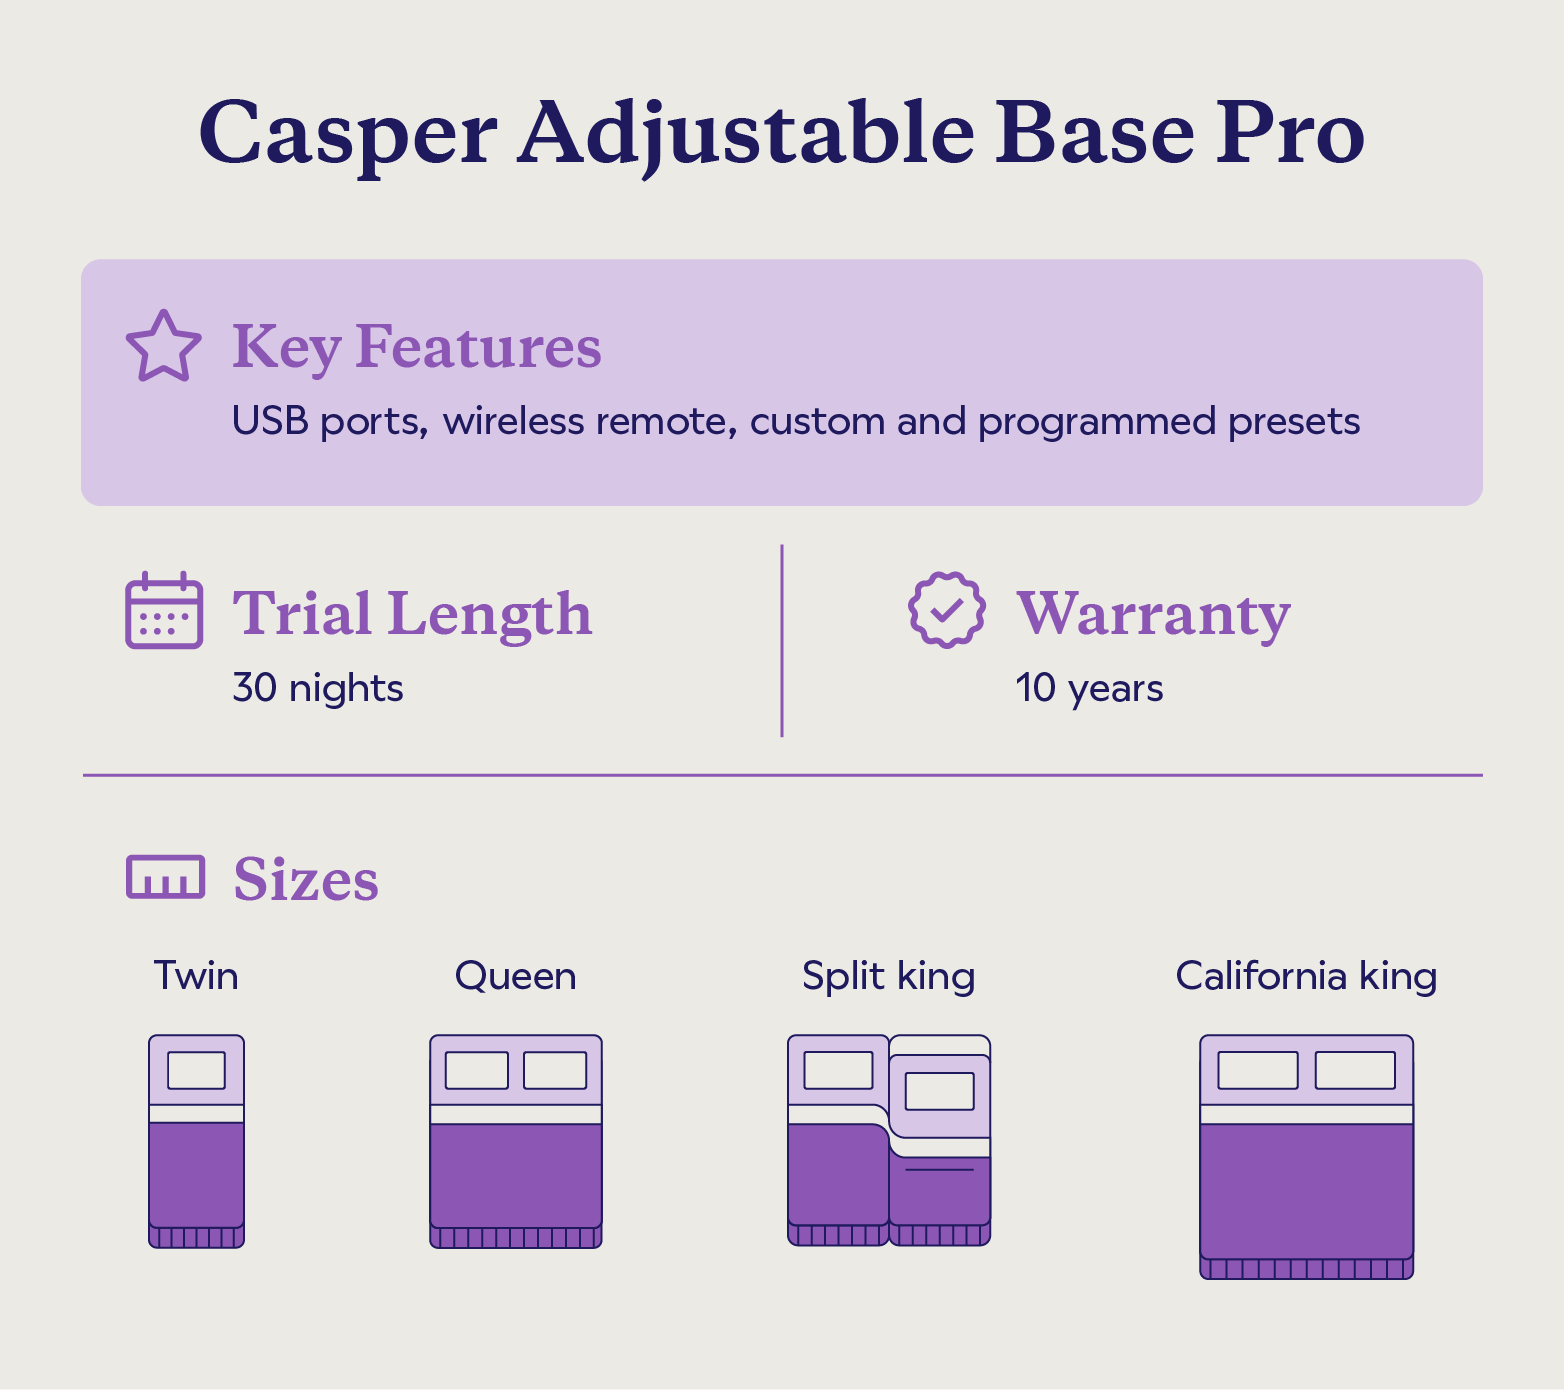 Key features and sizes of the Casper Adjustable Base Pro.